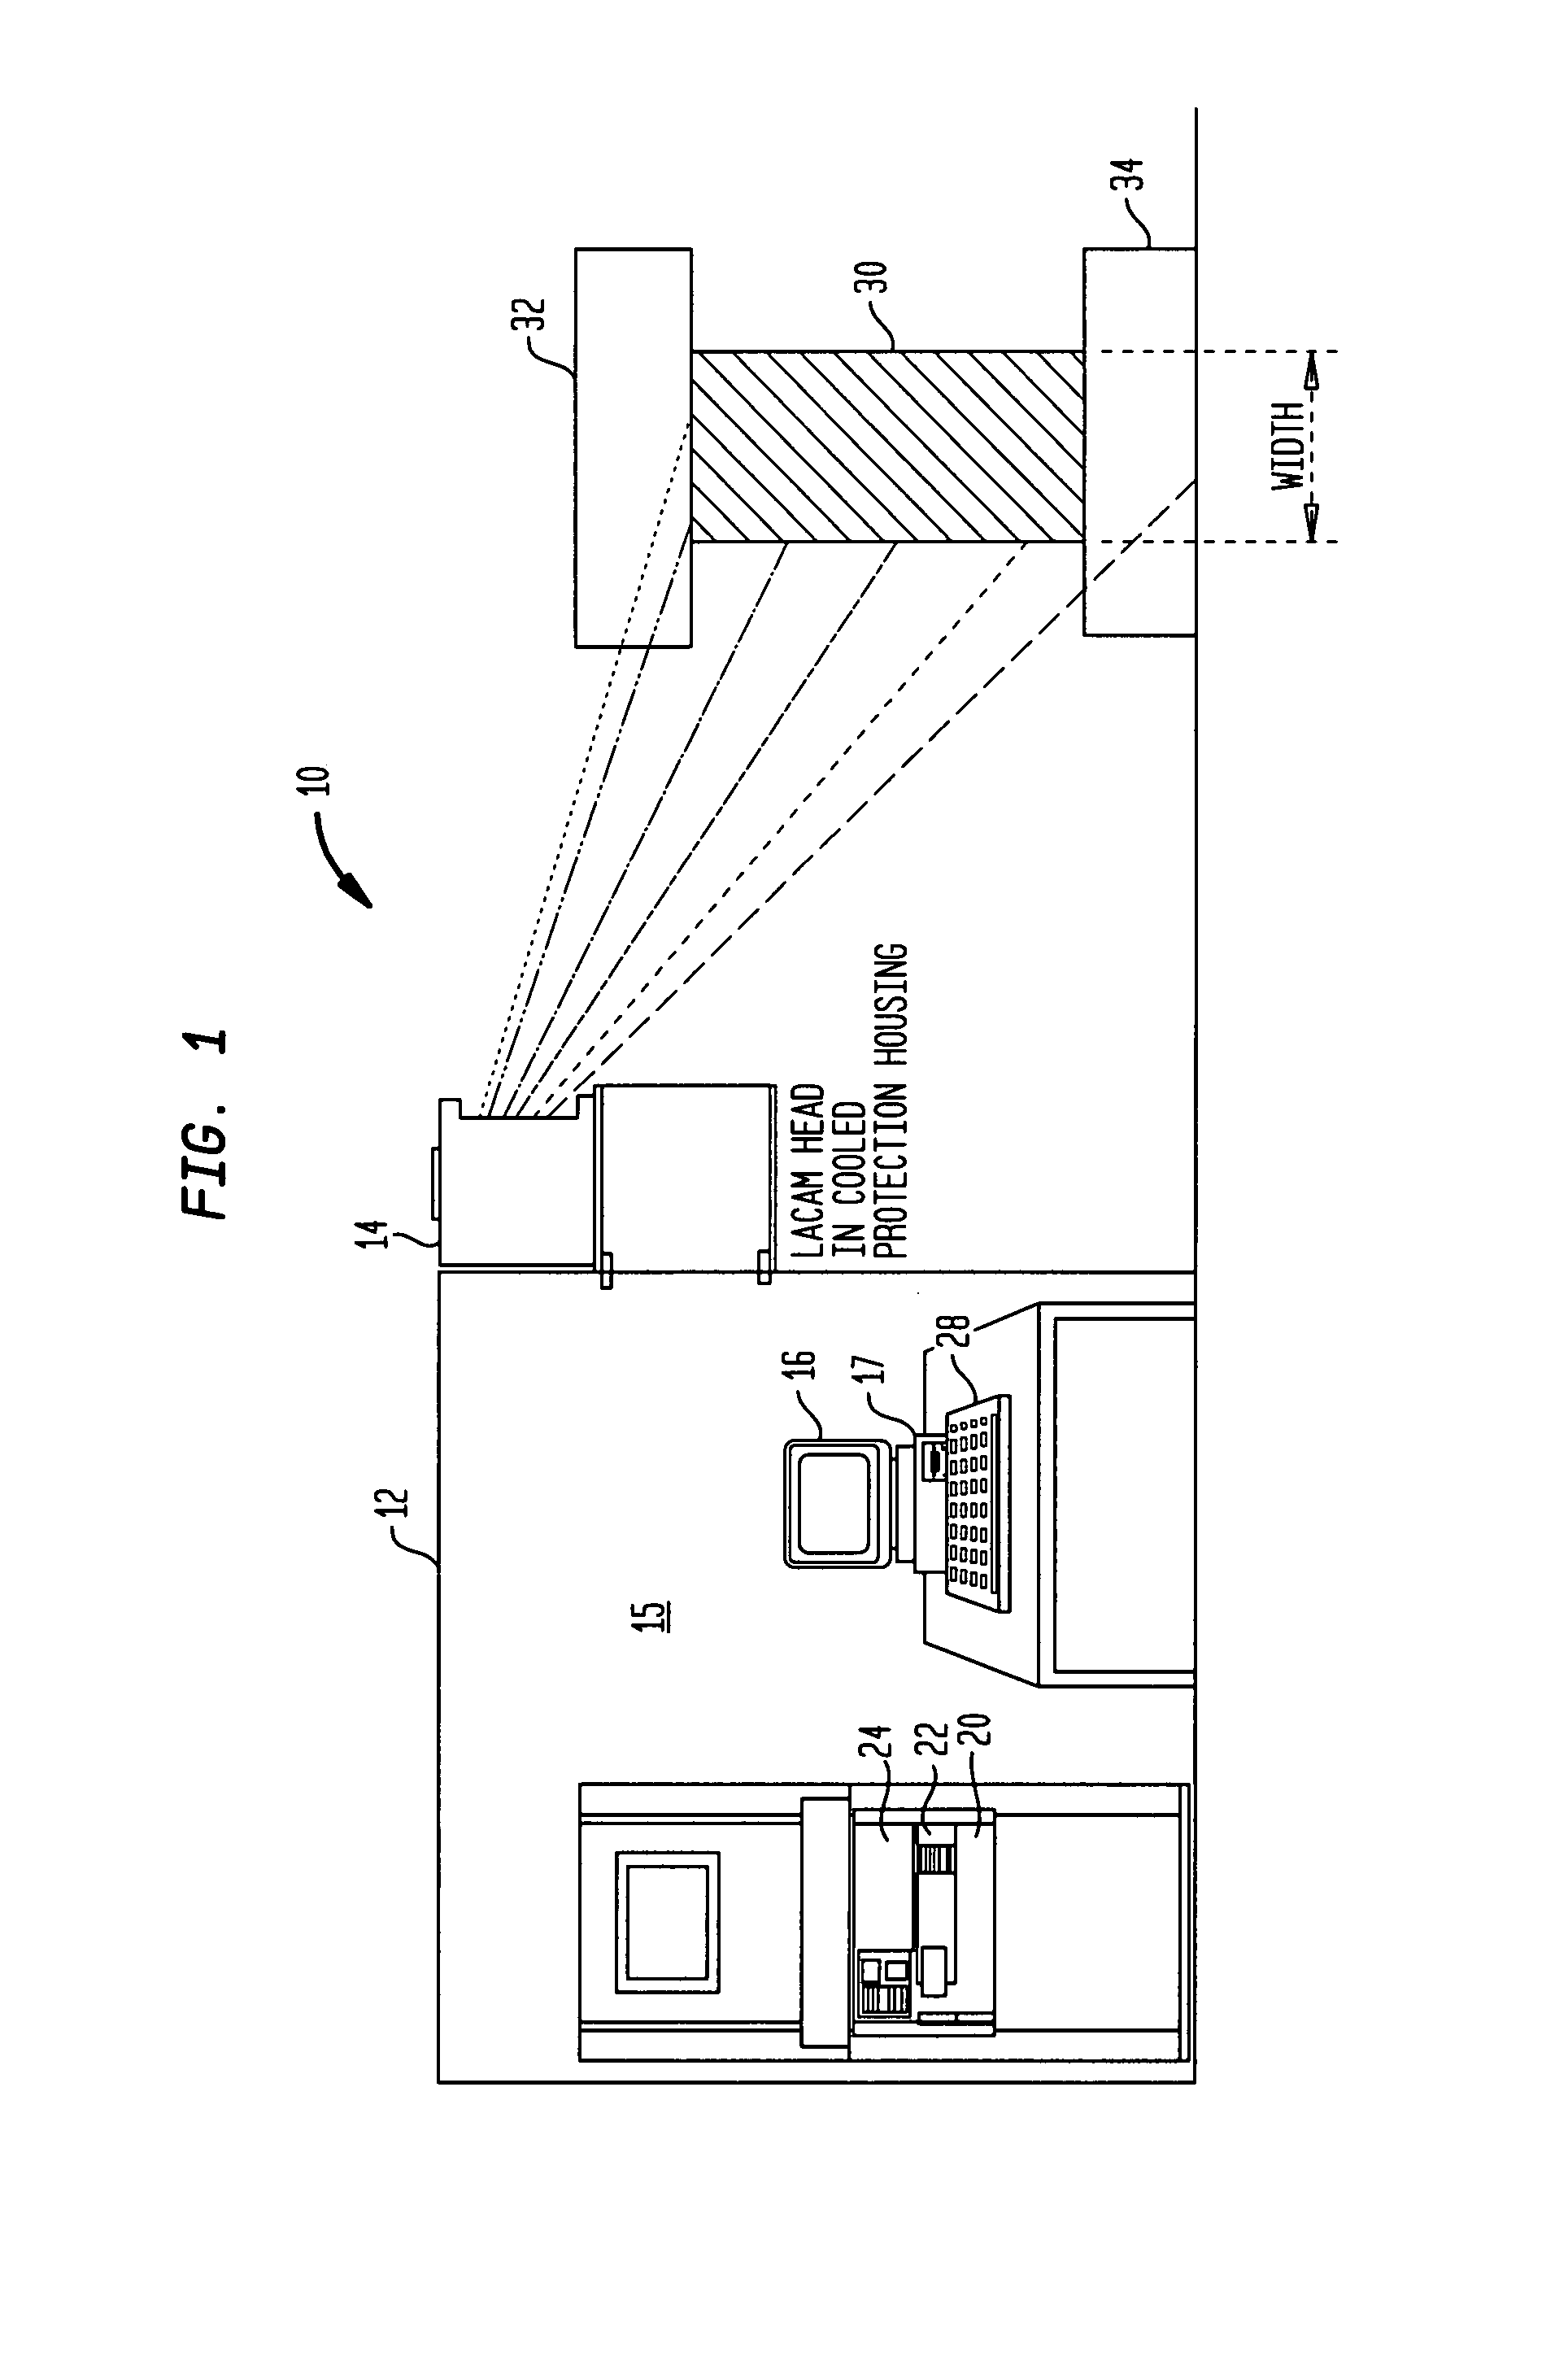 Method and apparatus for optimizing forging processes